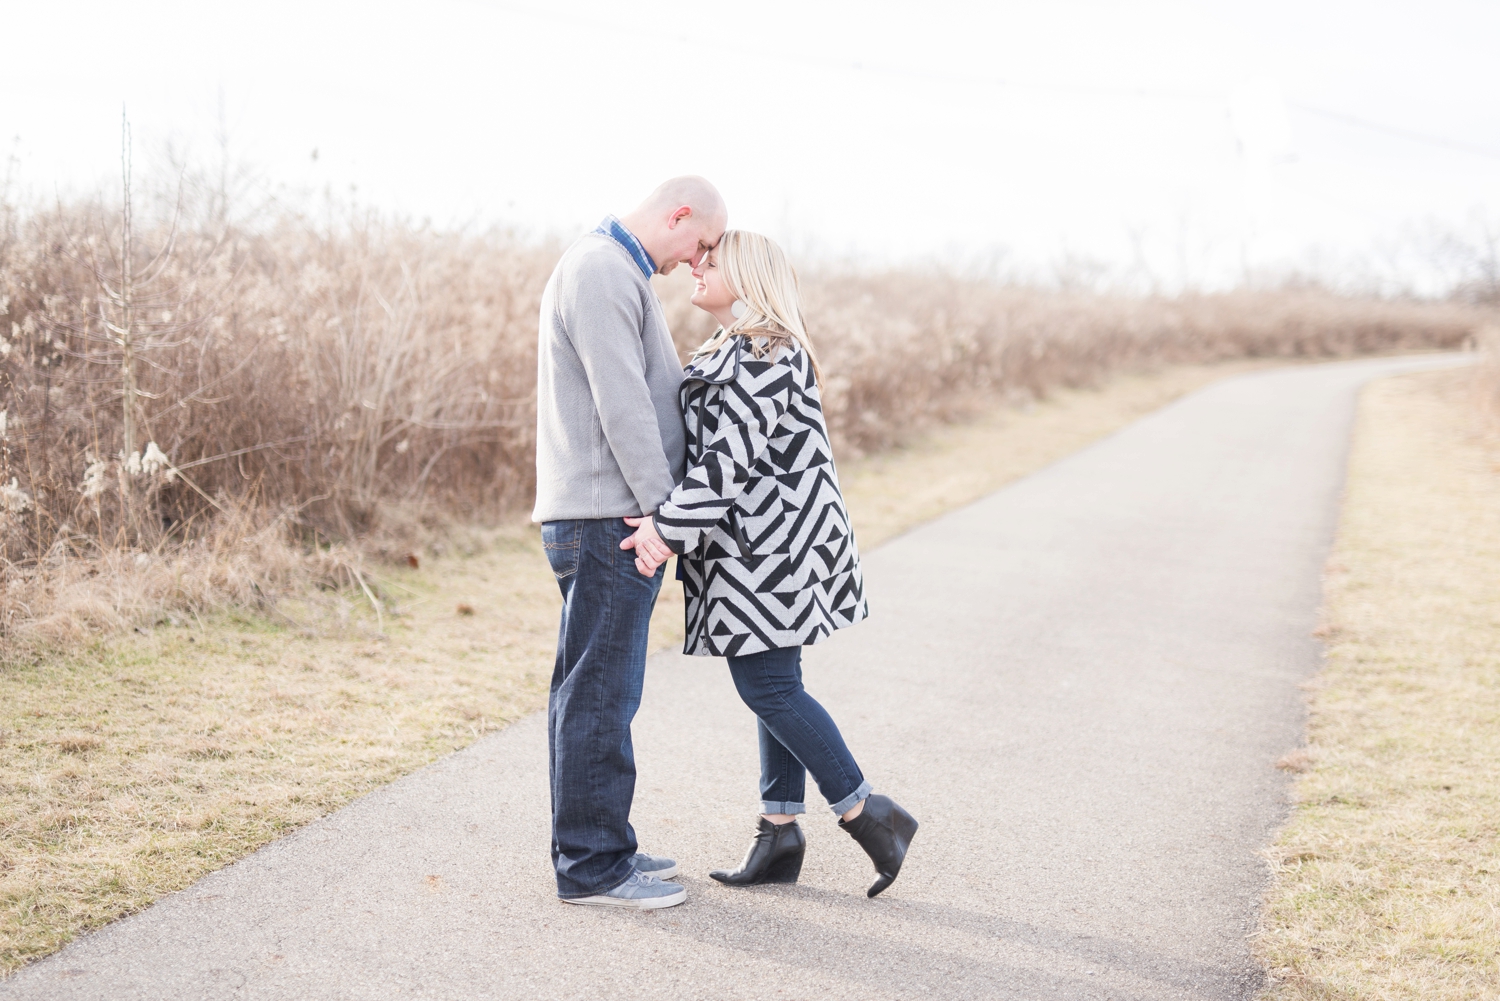 winter-engaged-couple-at-their-photo-session-at-the-scioto-audubon-park-near-grange-audubon-center-with-walkways-and-grass_0317